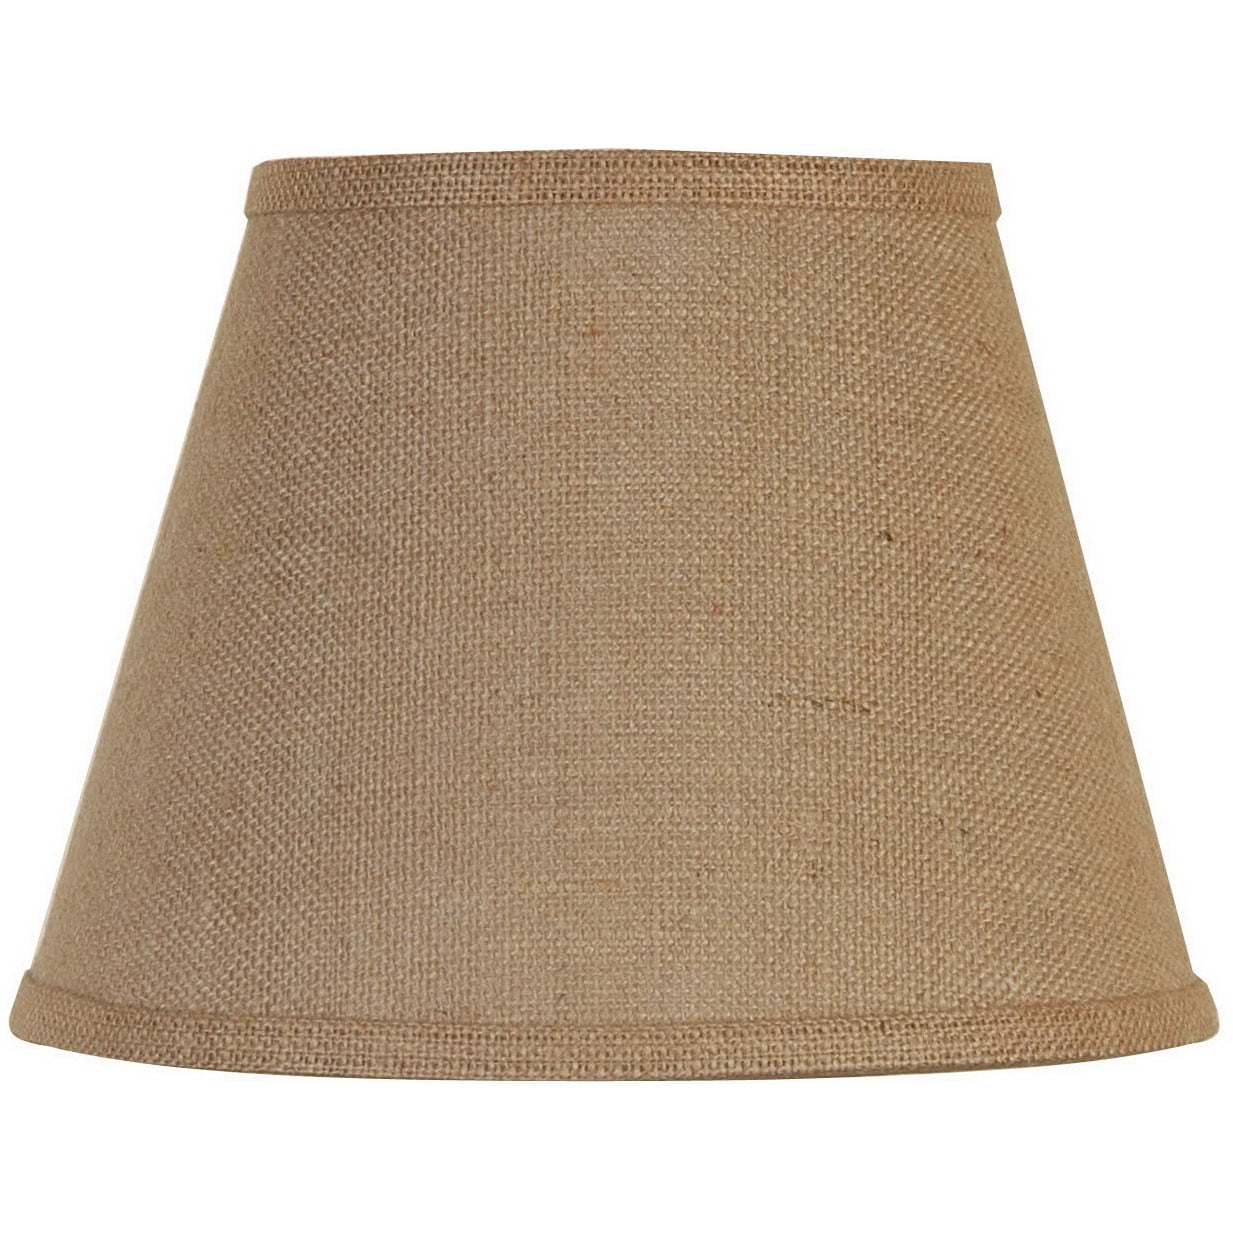 Better Homes and Gardens Large Lamp Shade Burlap Fabric Round Drum Shade Brown 